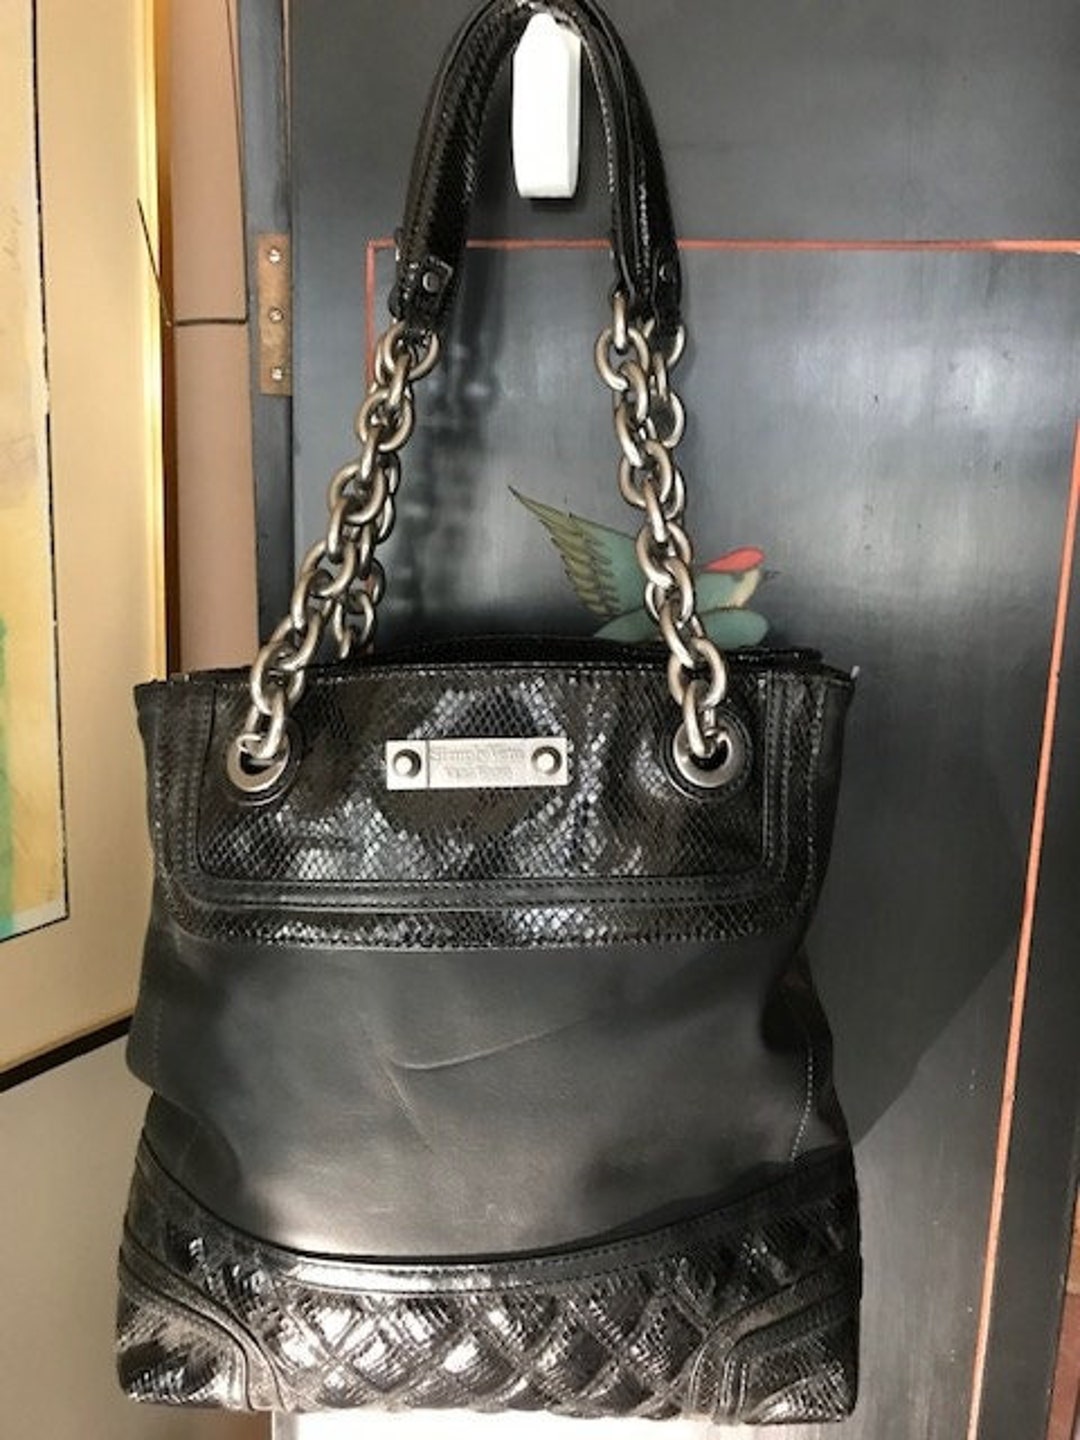 Can anyone tell me If it's a authentic Coach bag? : r/vinted